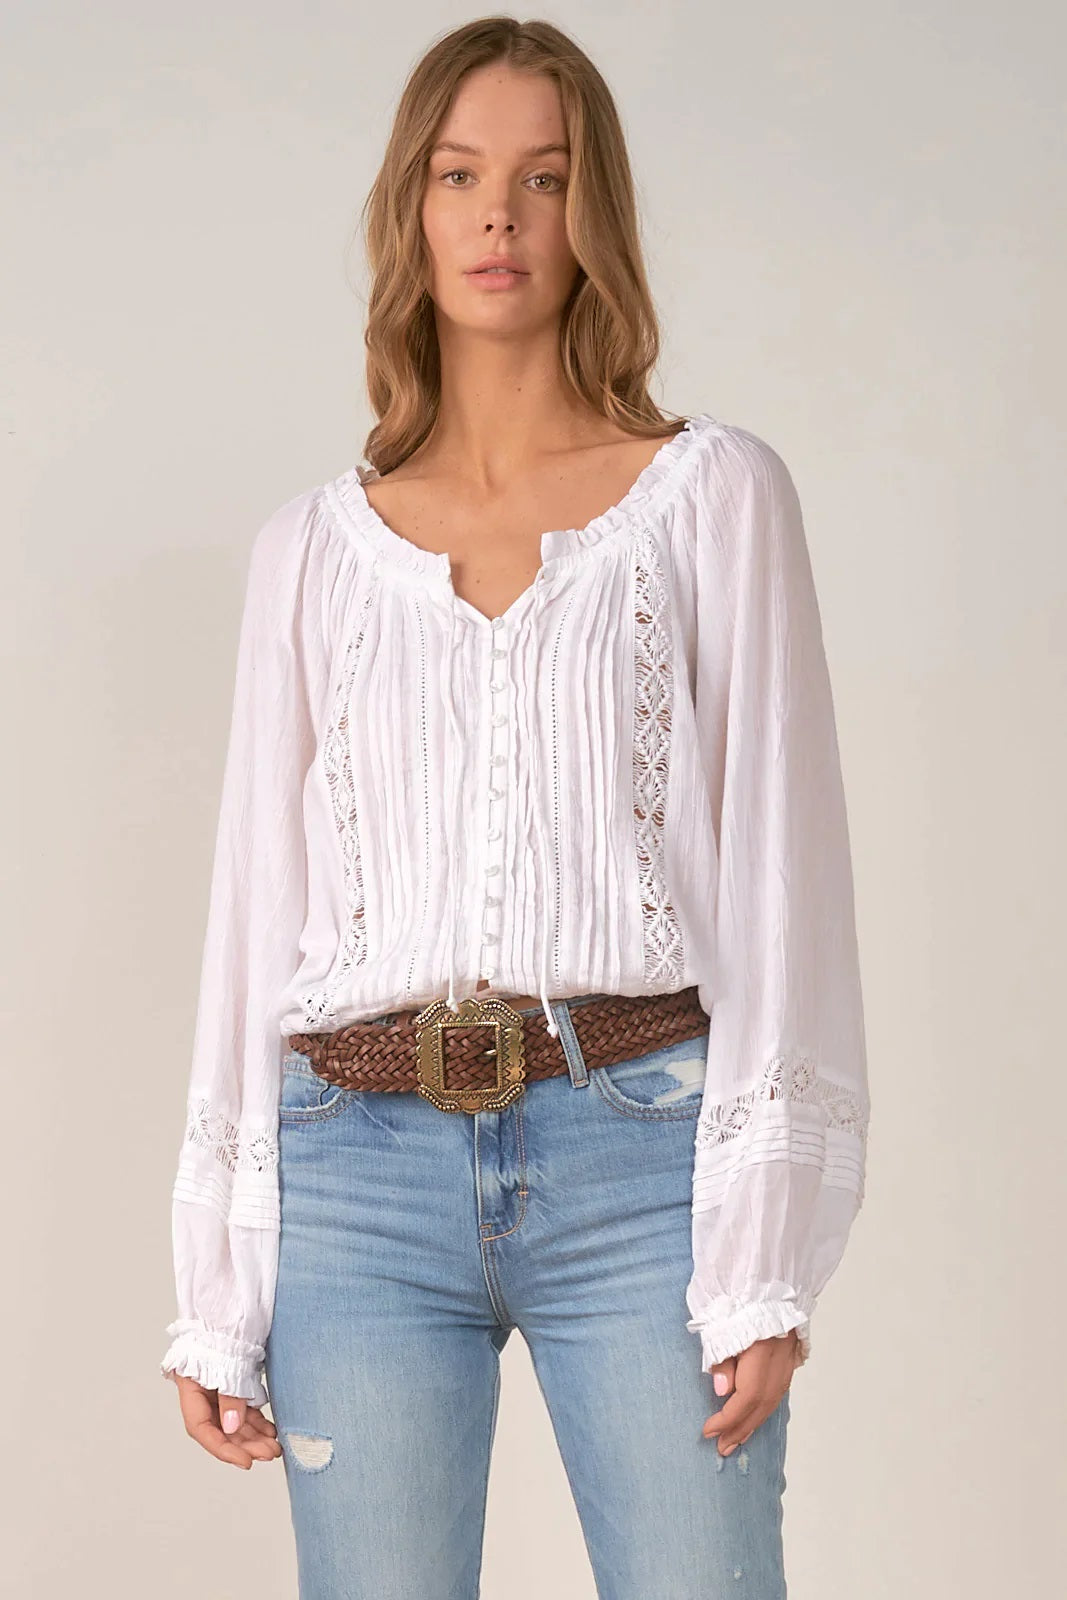 LONG SLEEVE PEASANT TOP- WHITE - Kingfisher Road - Online Boutique